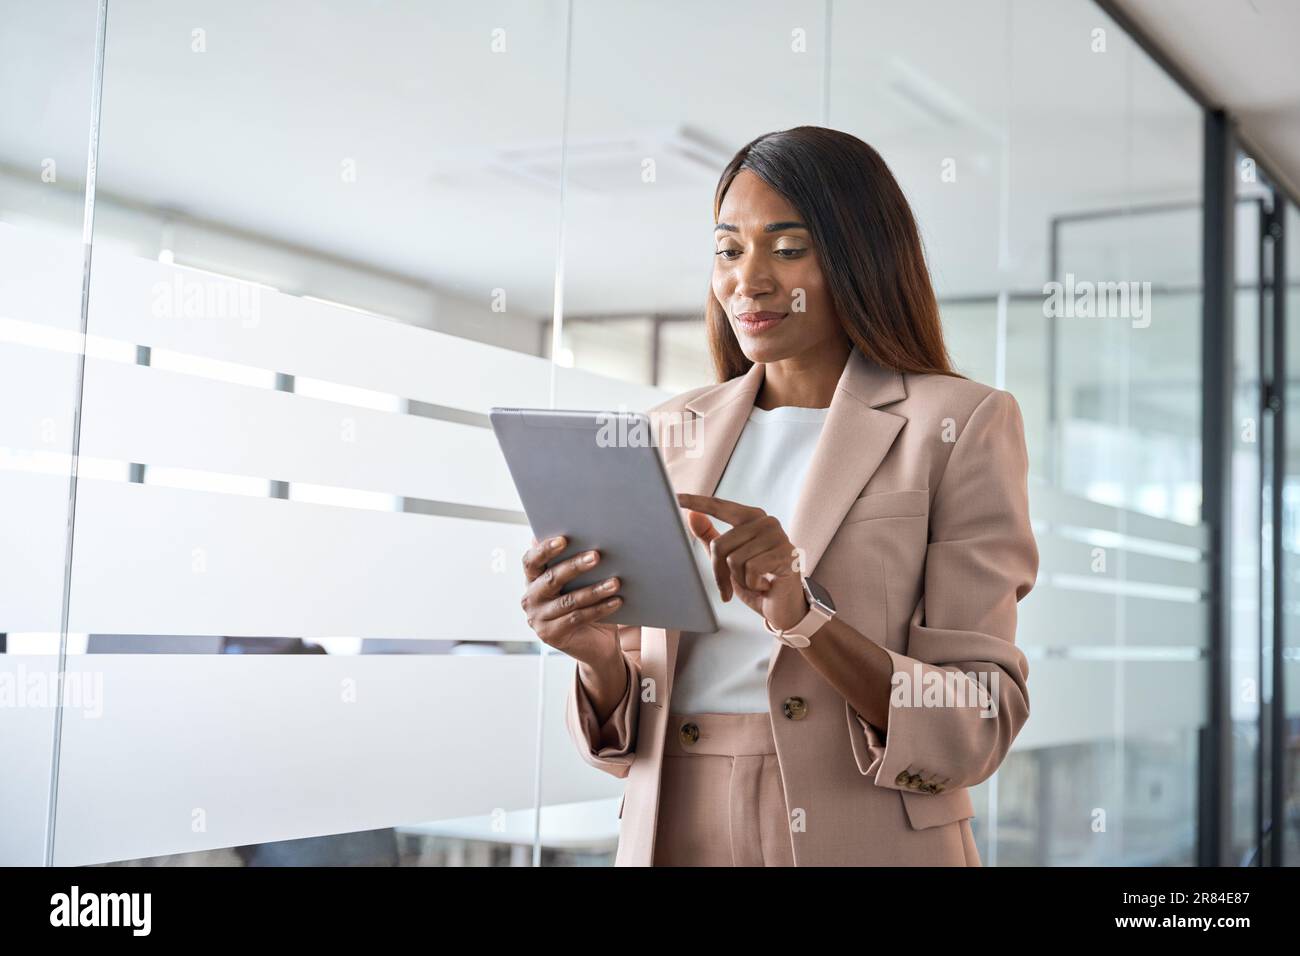 Young busy African American business woman using tablet standing in office. Stock Photo